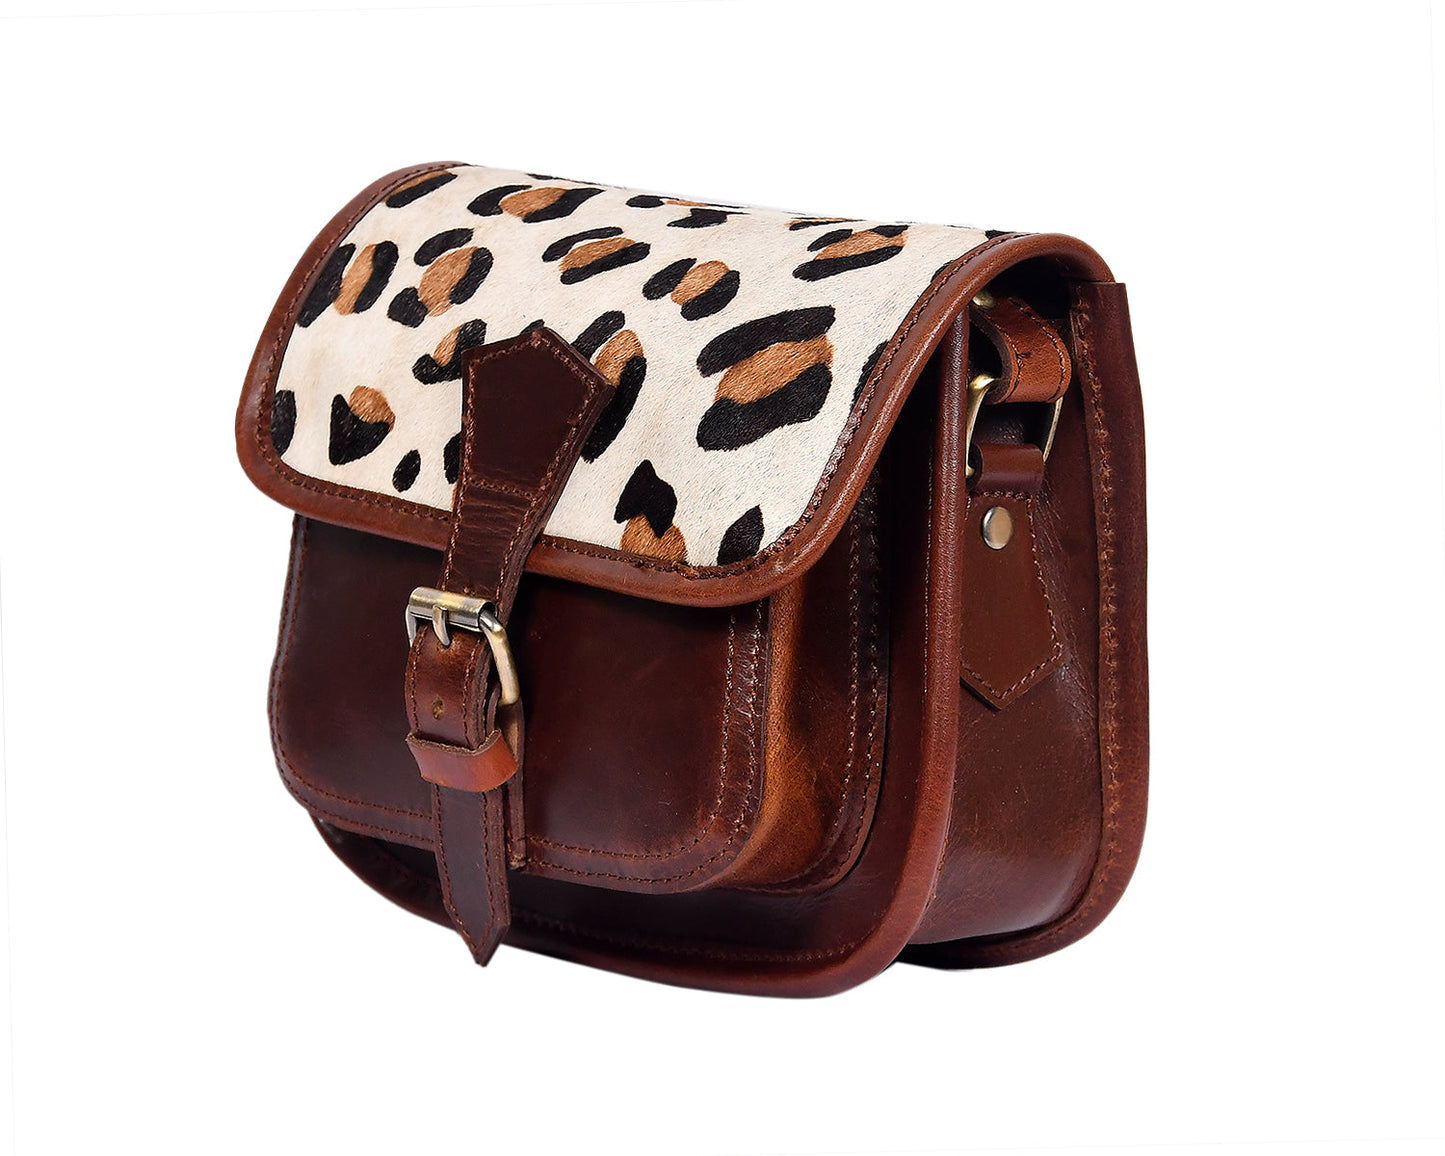 Wild Elegance: Sling Bag with Printed Hair on Leather. - CELTICINDIA